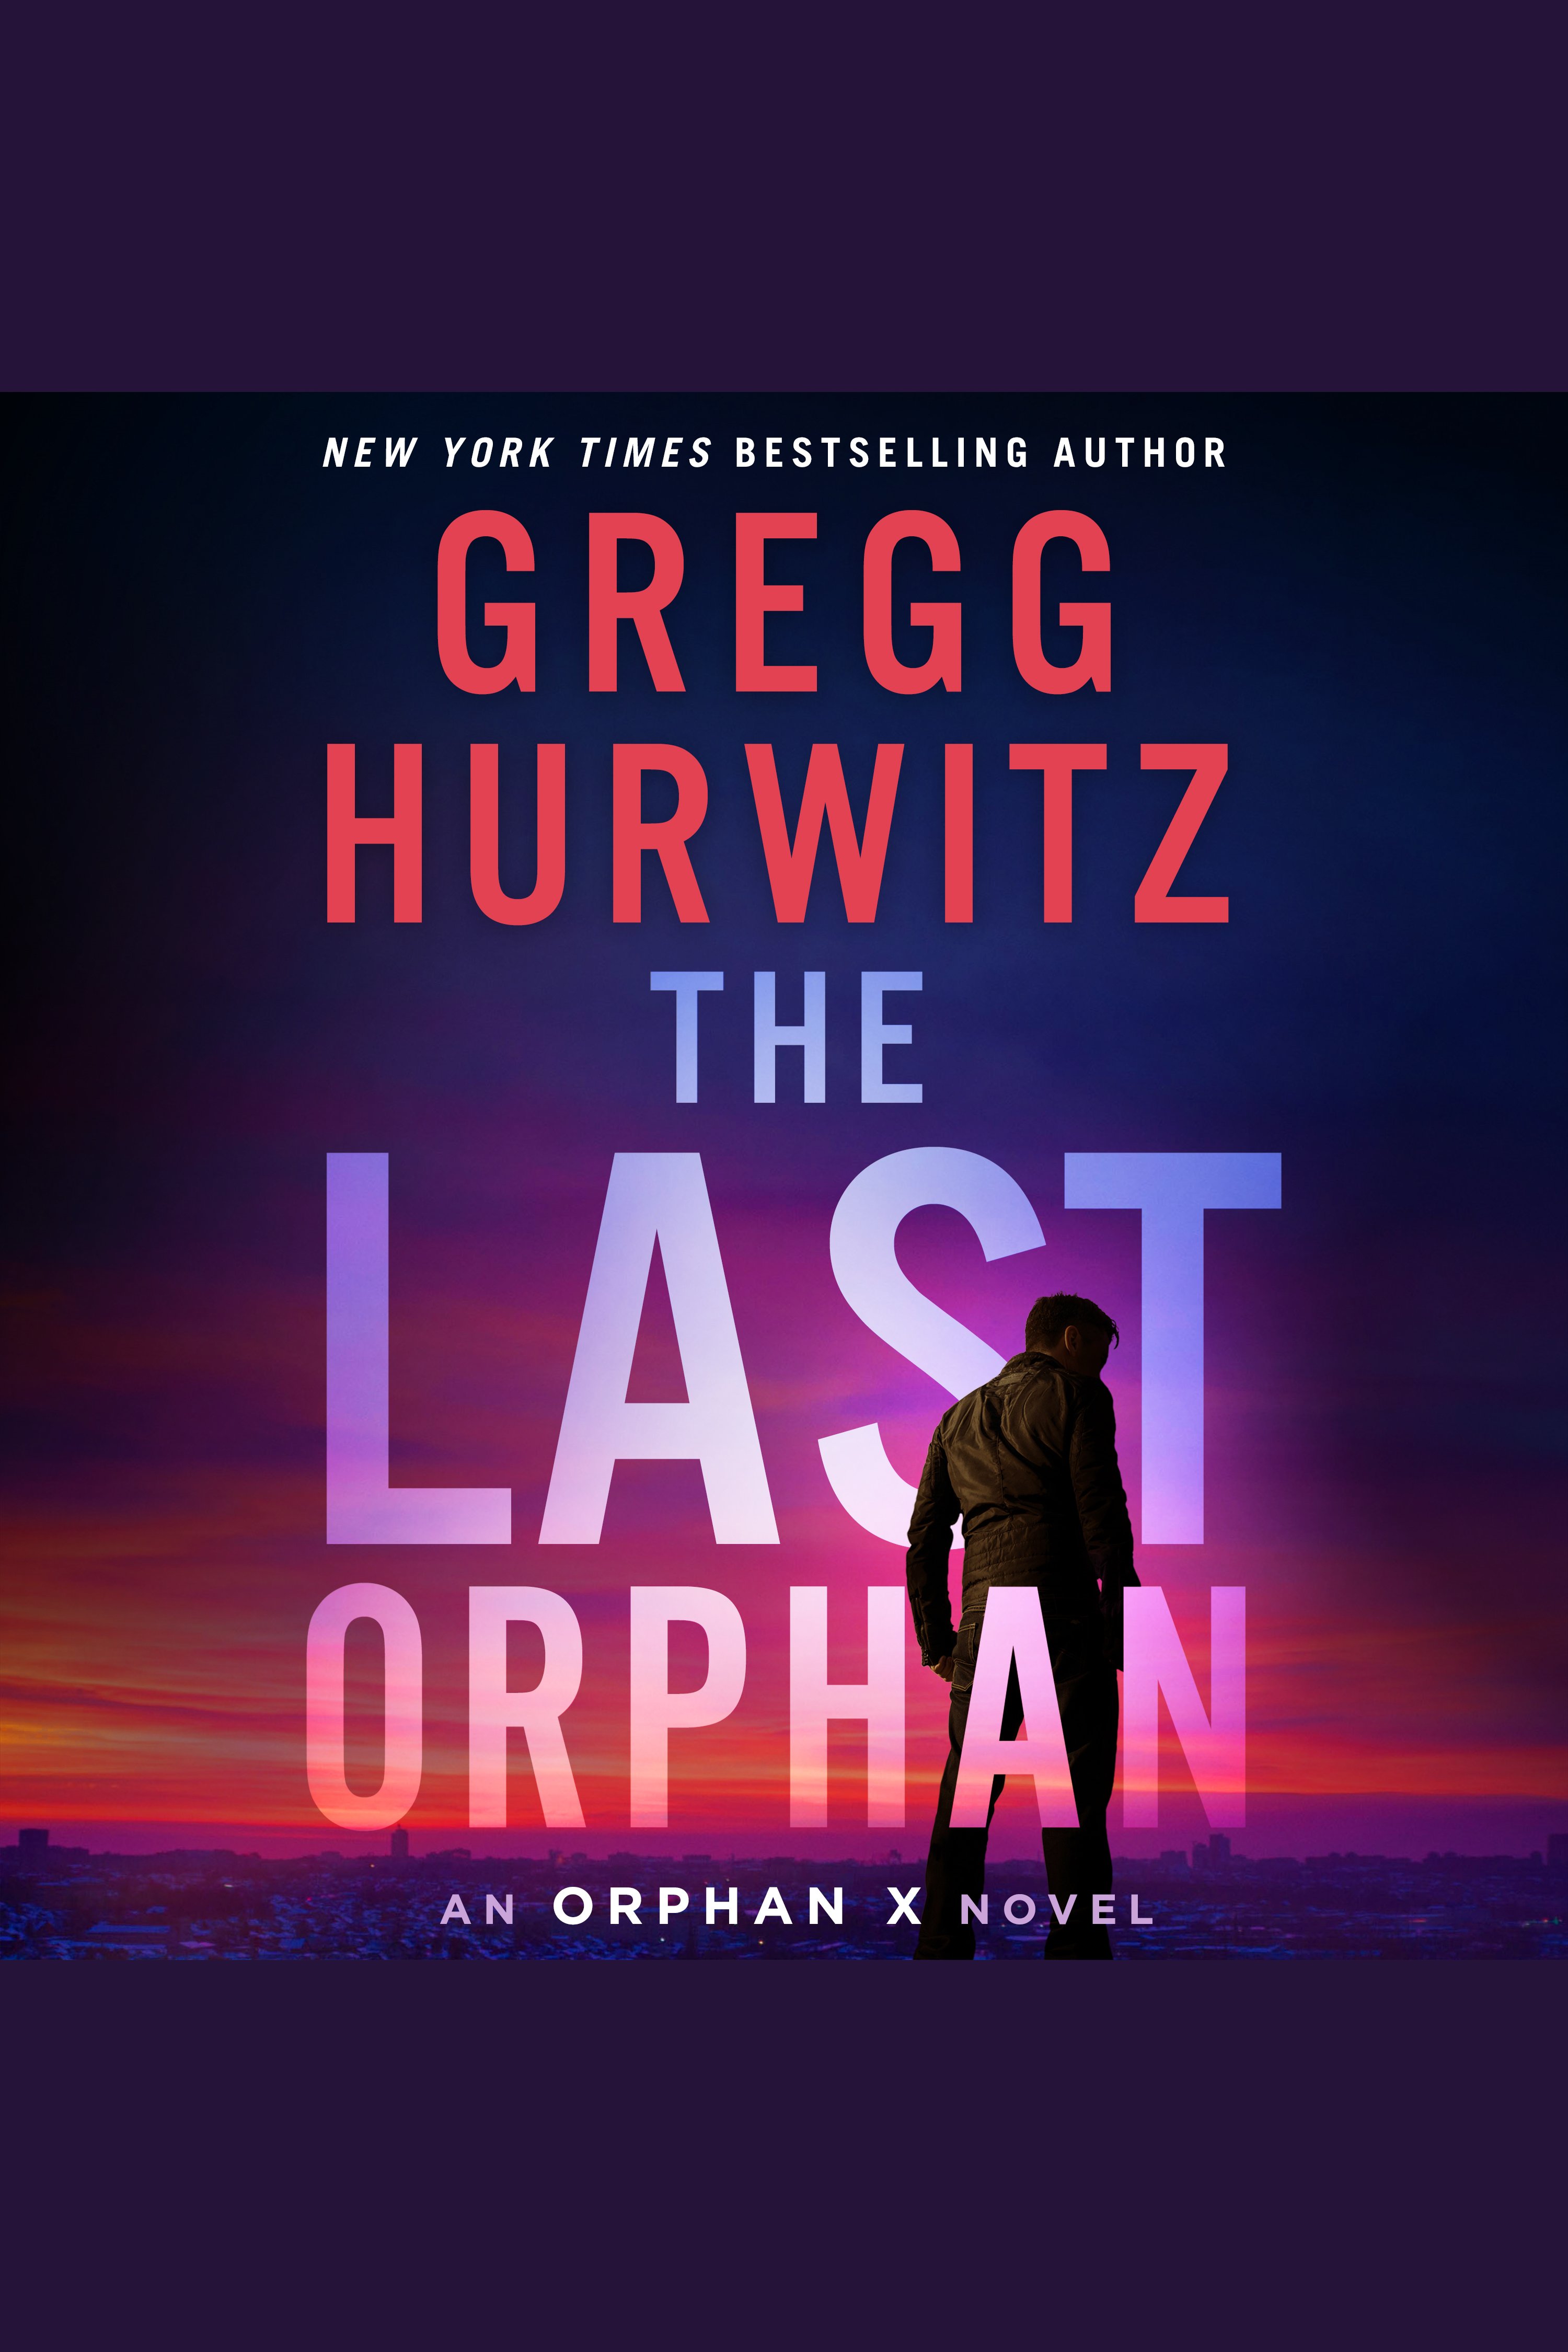 The last orphan cover image